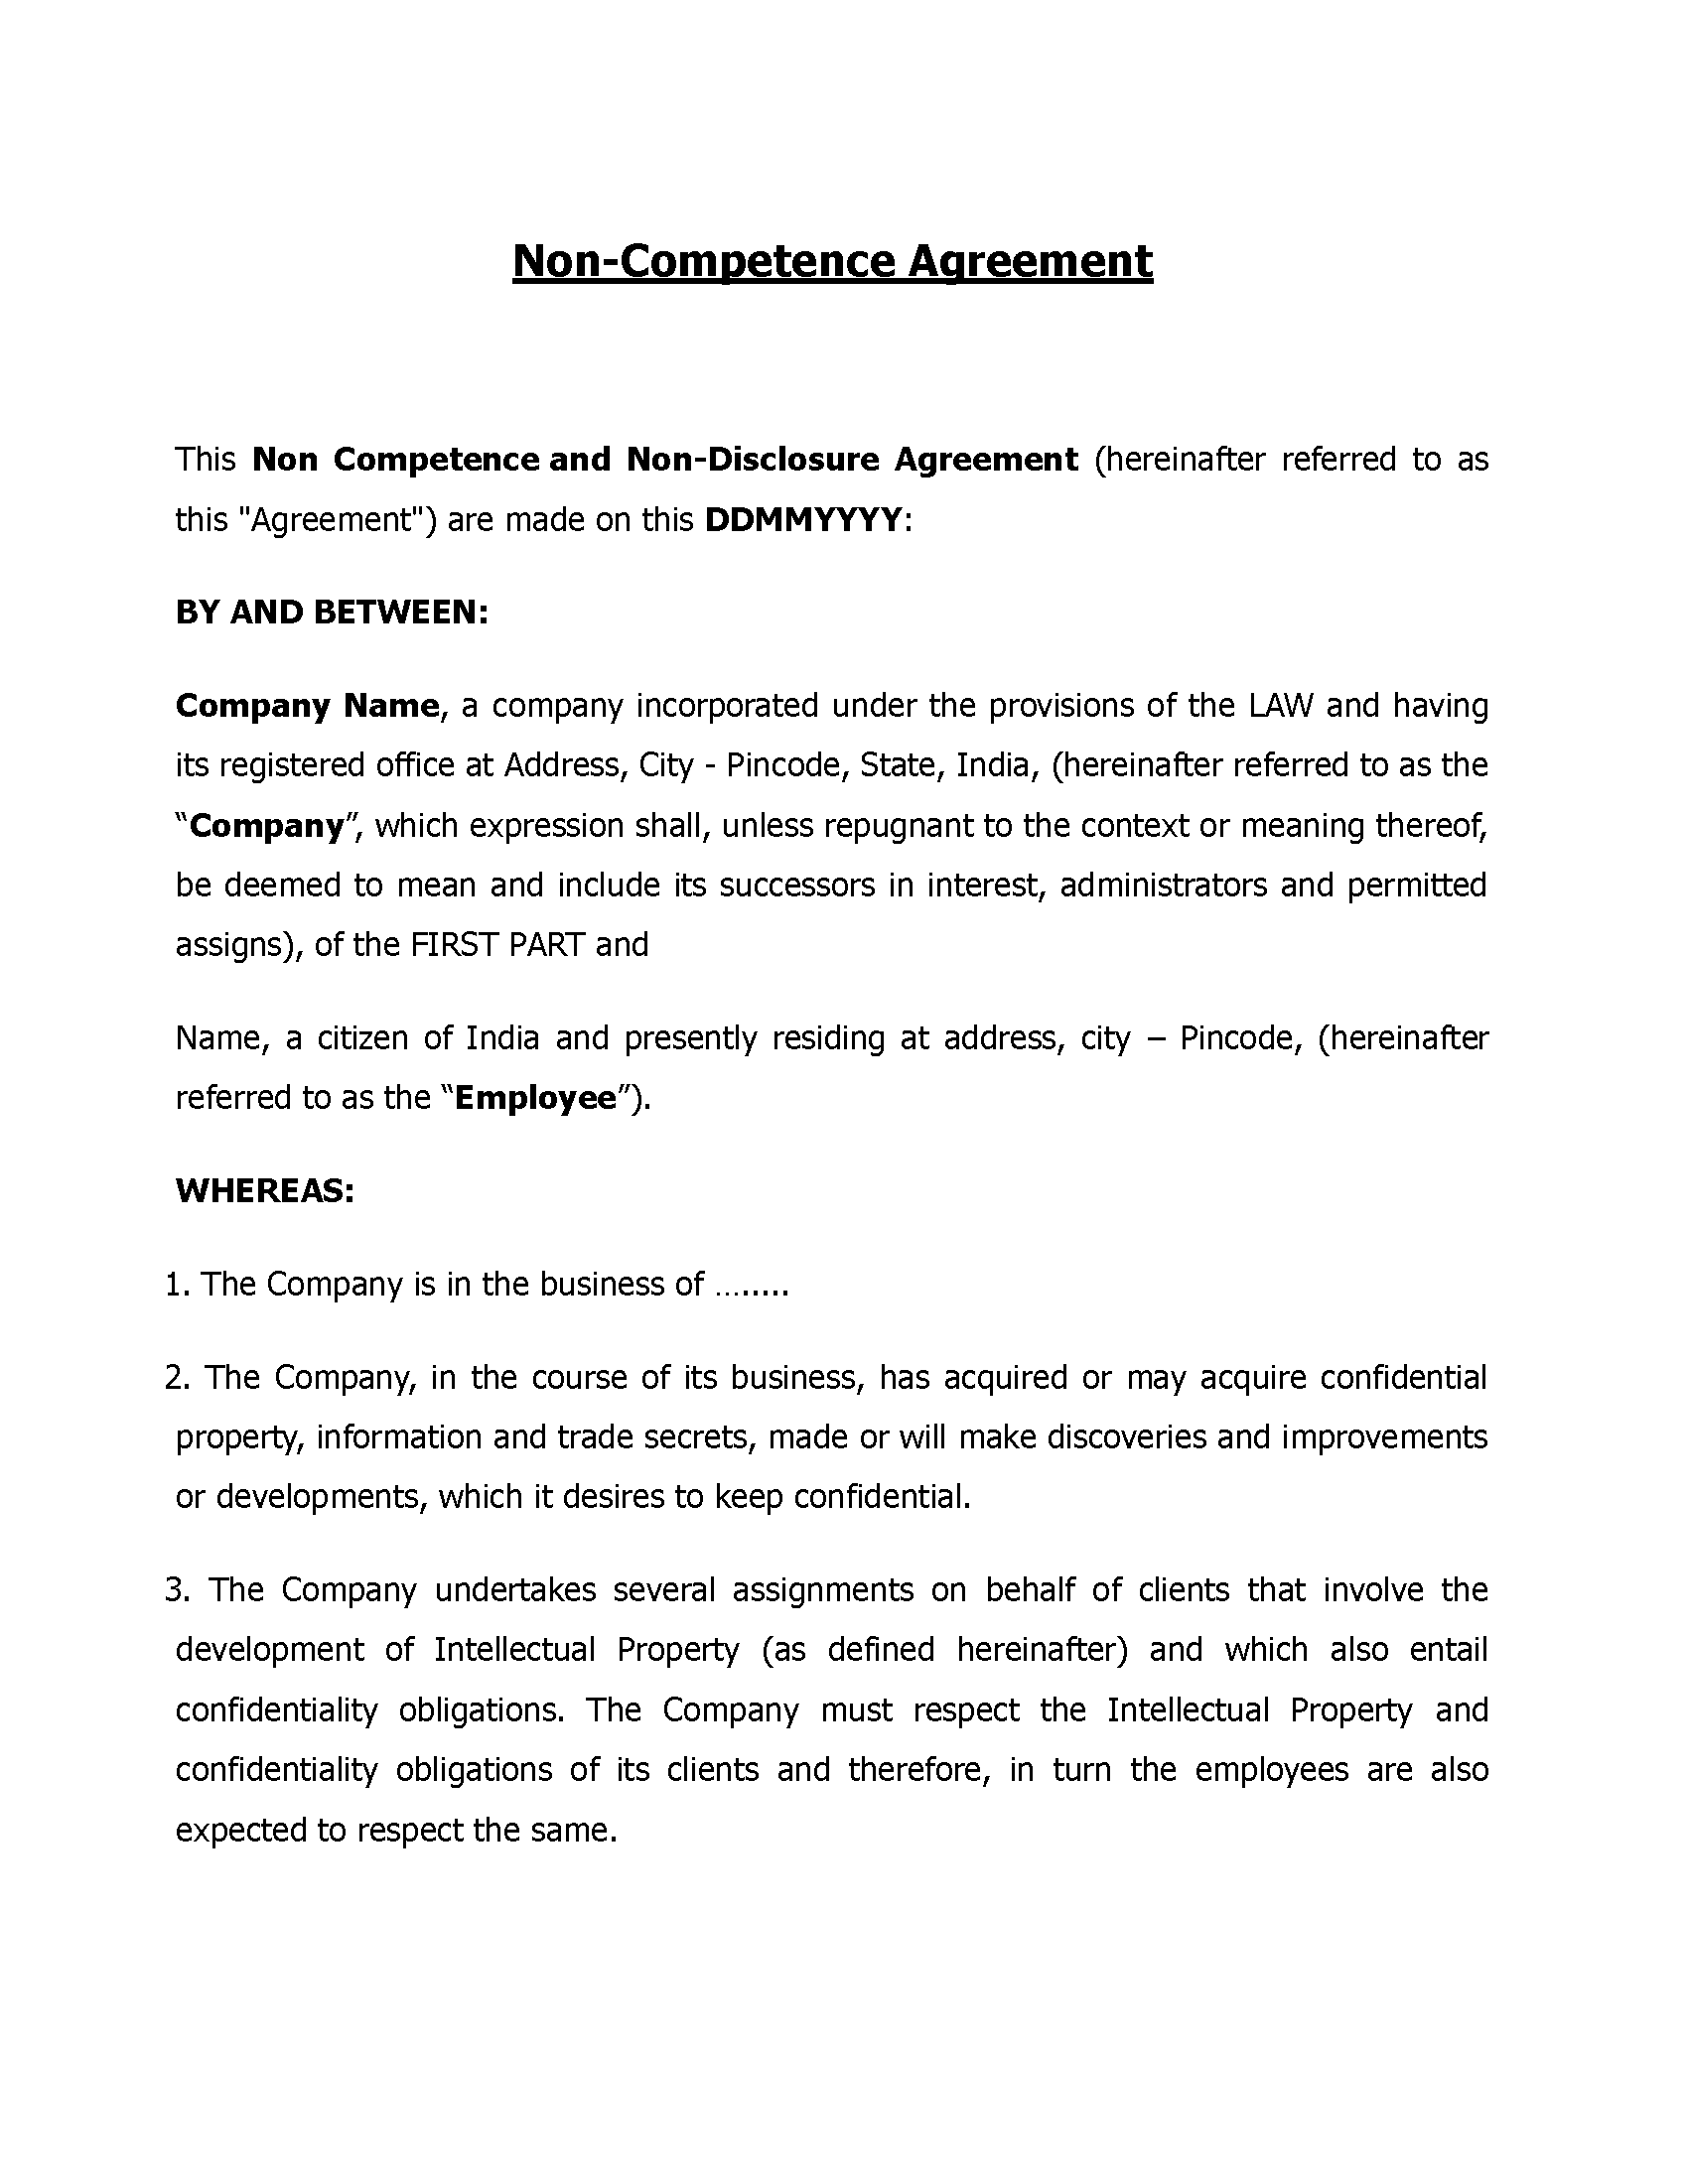 Non Competence And Non-Disclosure Agreement